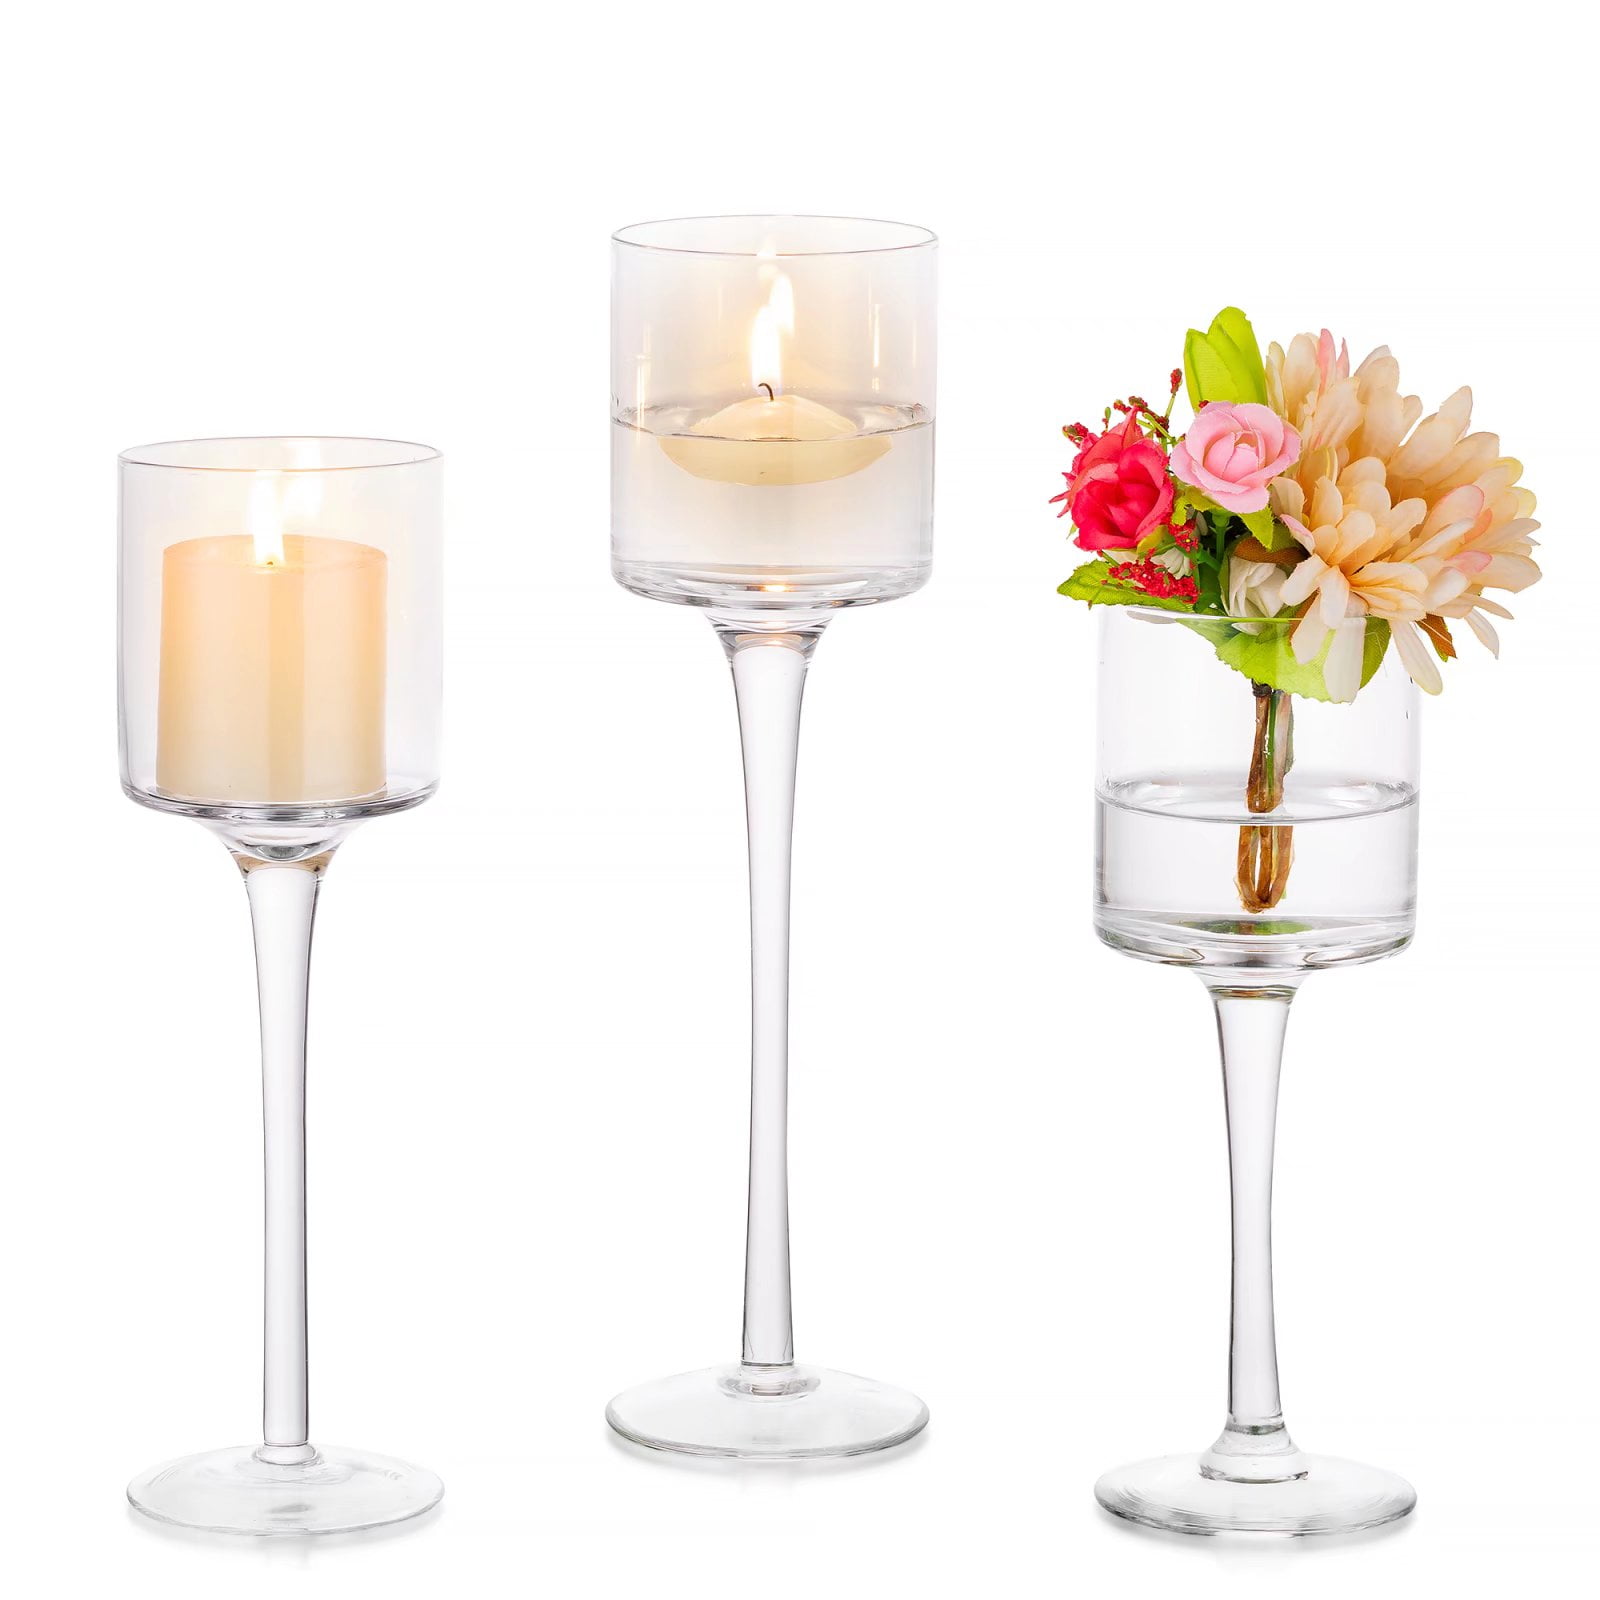 L + L Sziqiqi Glass Candle Holders Set of 2 Clear Pillar Candle Holer for Wedding Party Candle Light Dinner Decorations Tall Vases for Wedding Centerpiece 